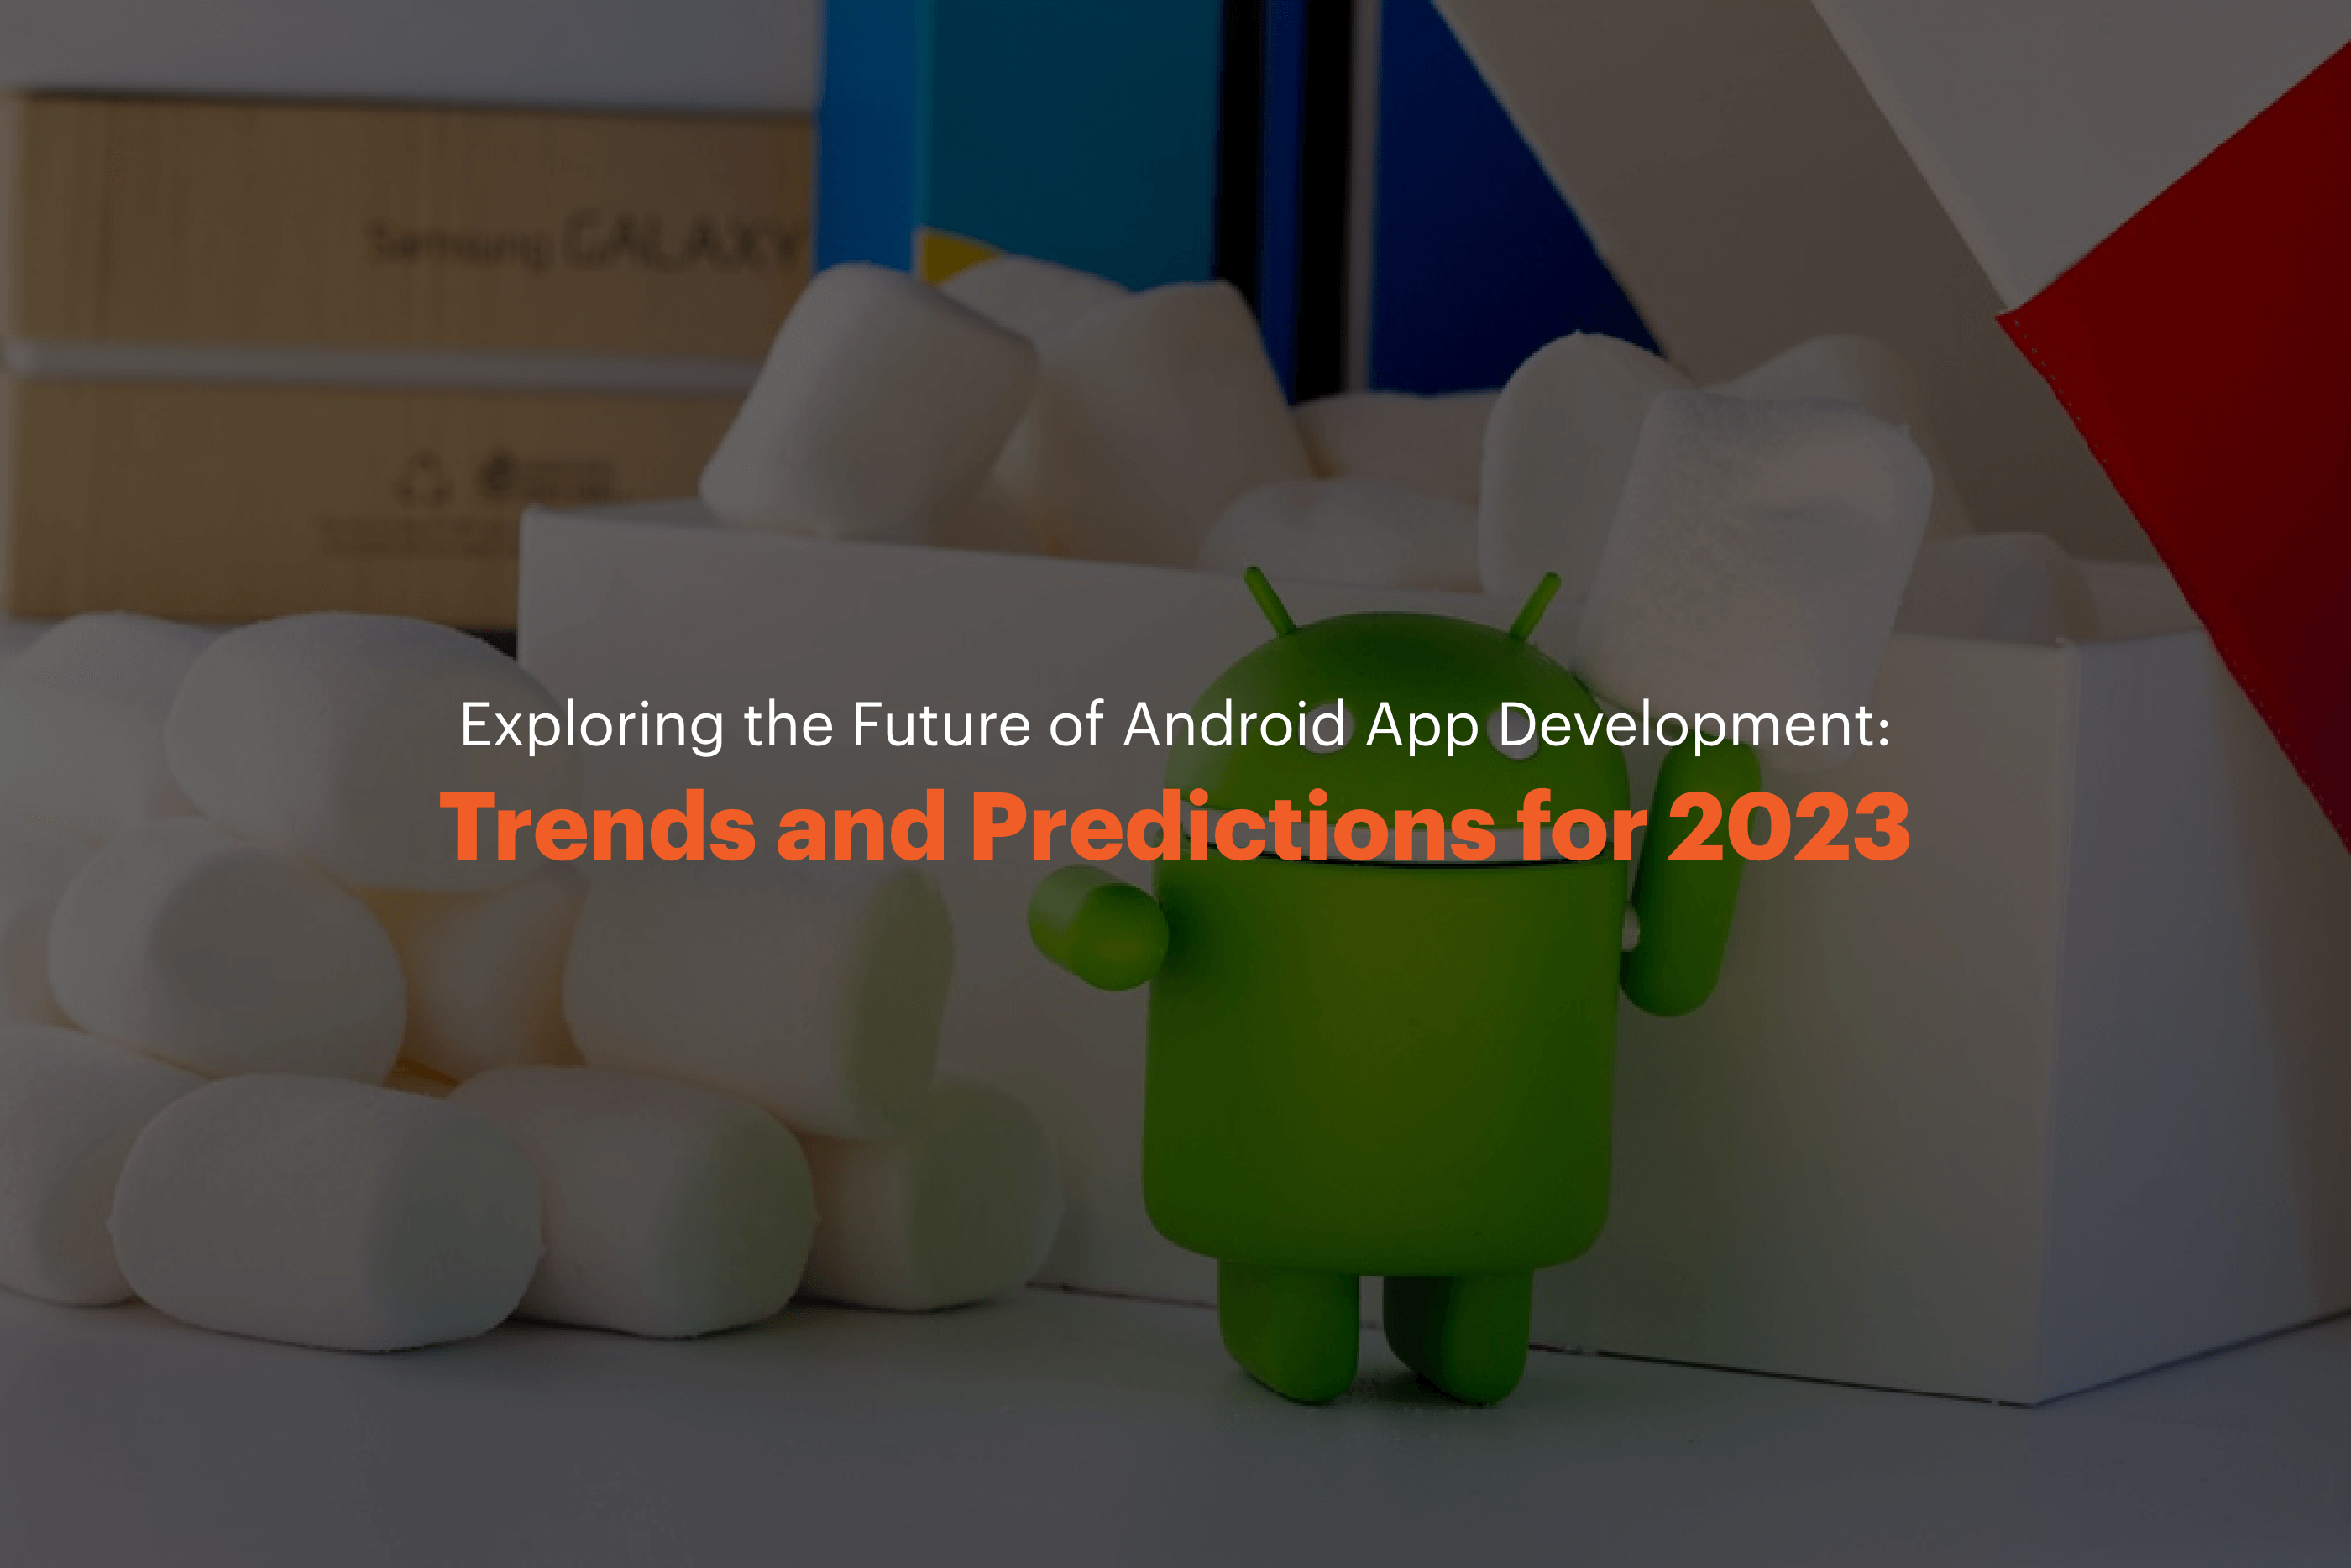 Exploring the Future of Android App Development: Trends and Predictions for 2023